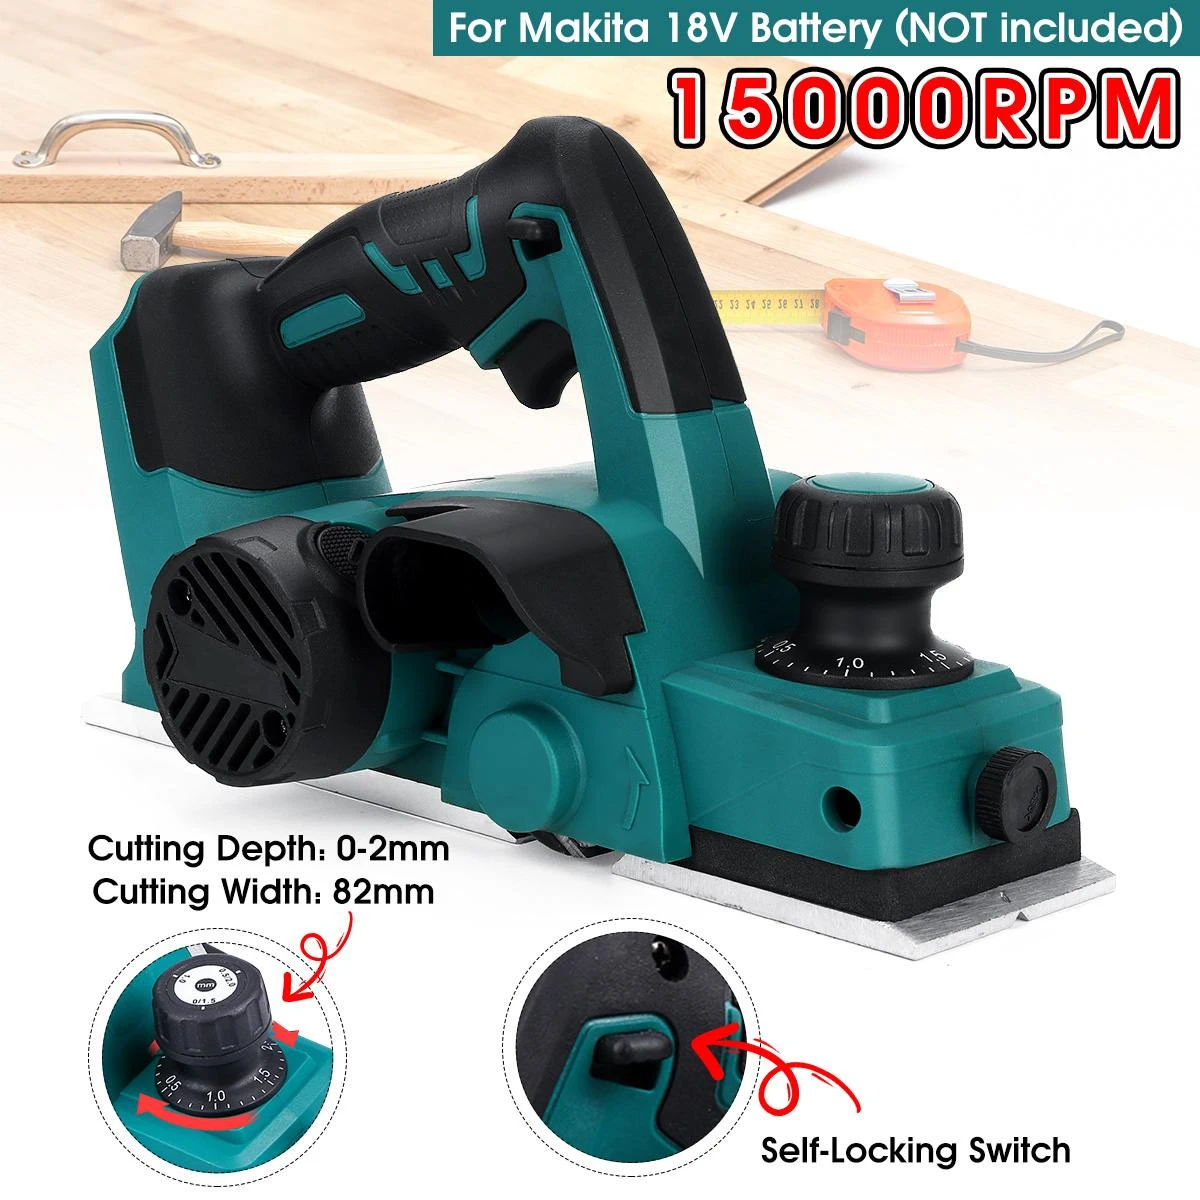 Drillpro 18V 15000rpm Rechargeable Electric Planer Cordless Hand Held for Makita 18V Battery Wood Cutting with Wrench